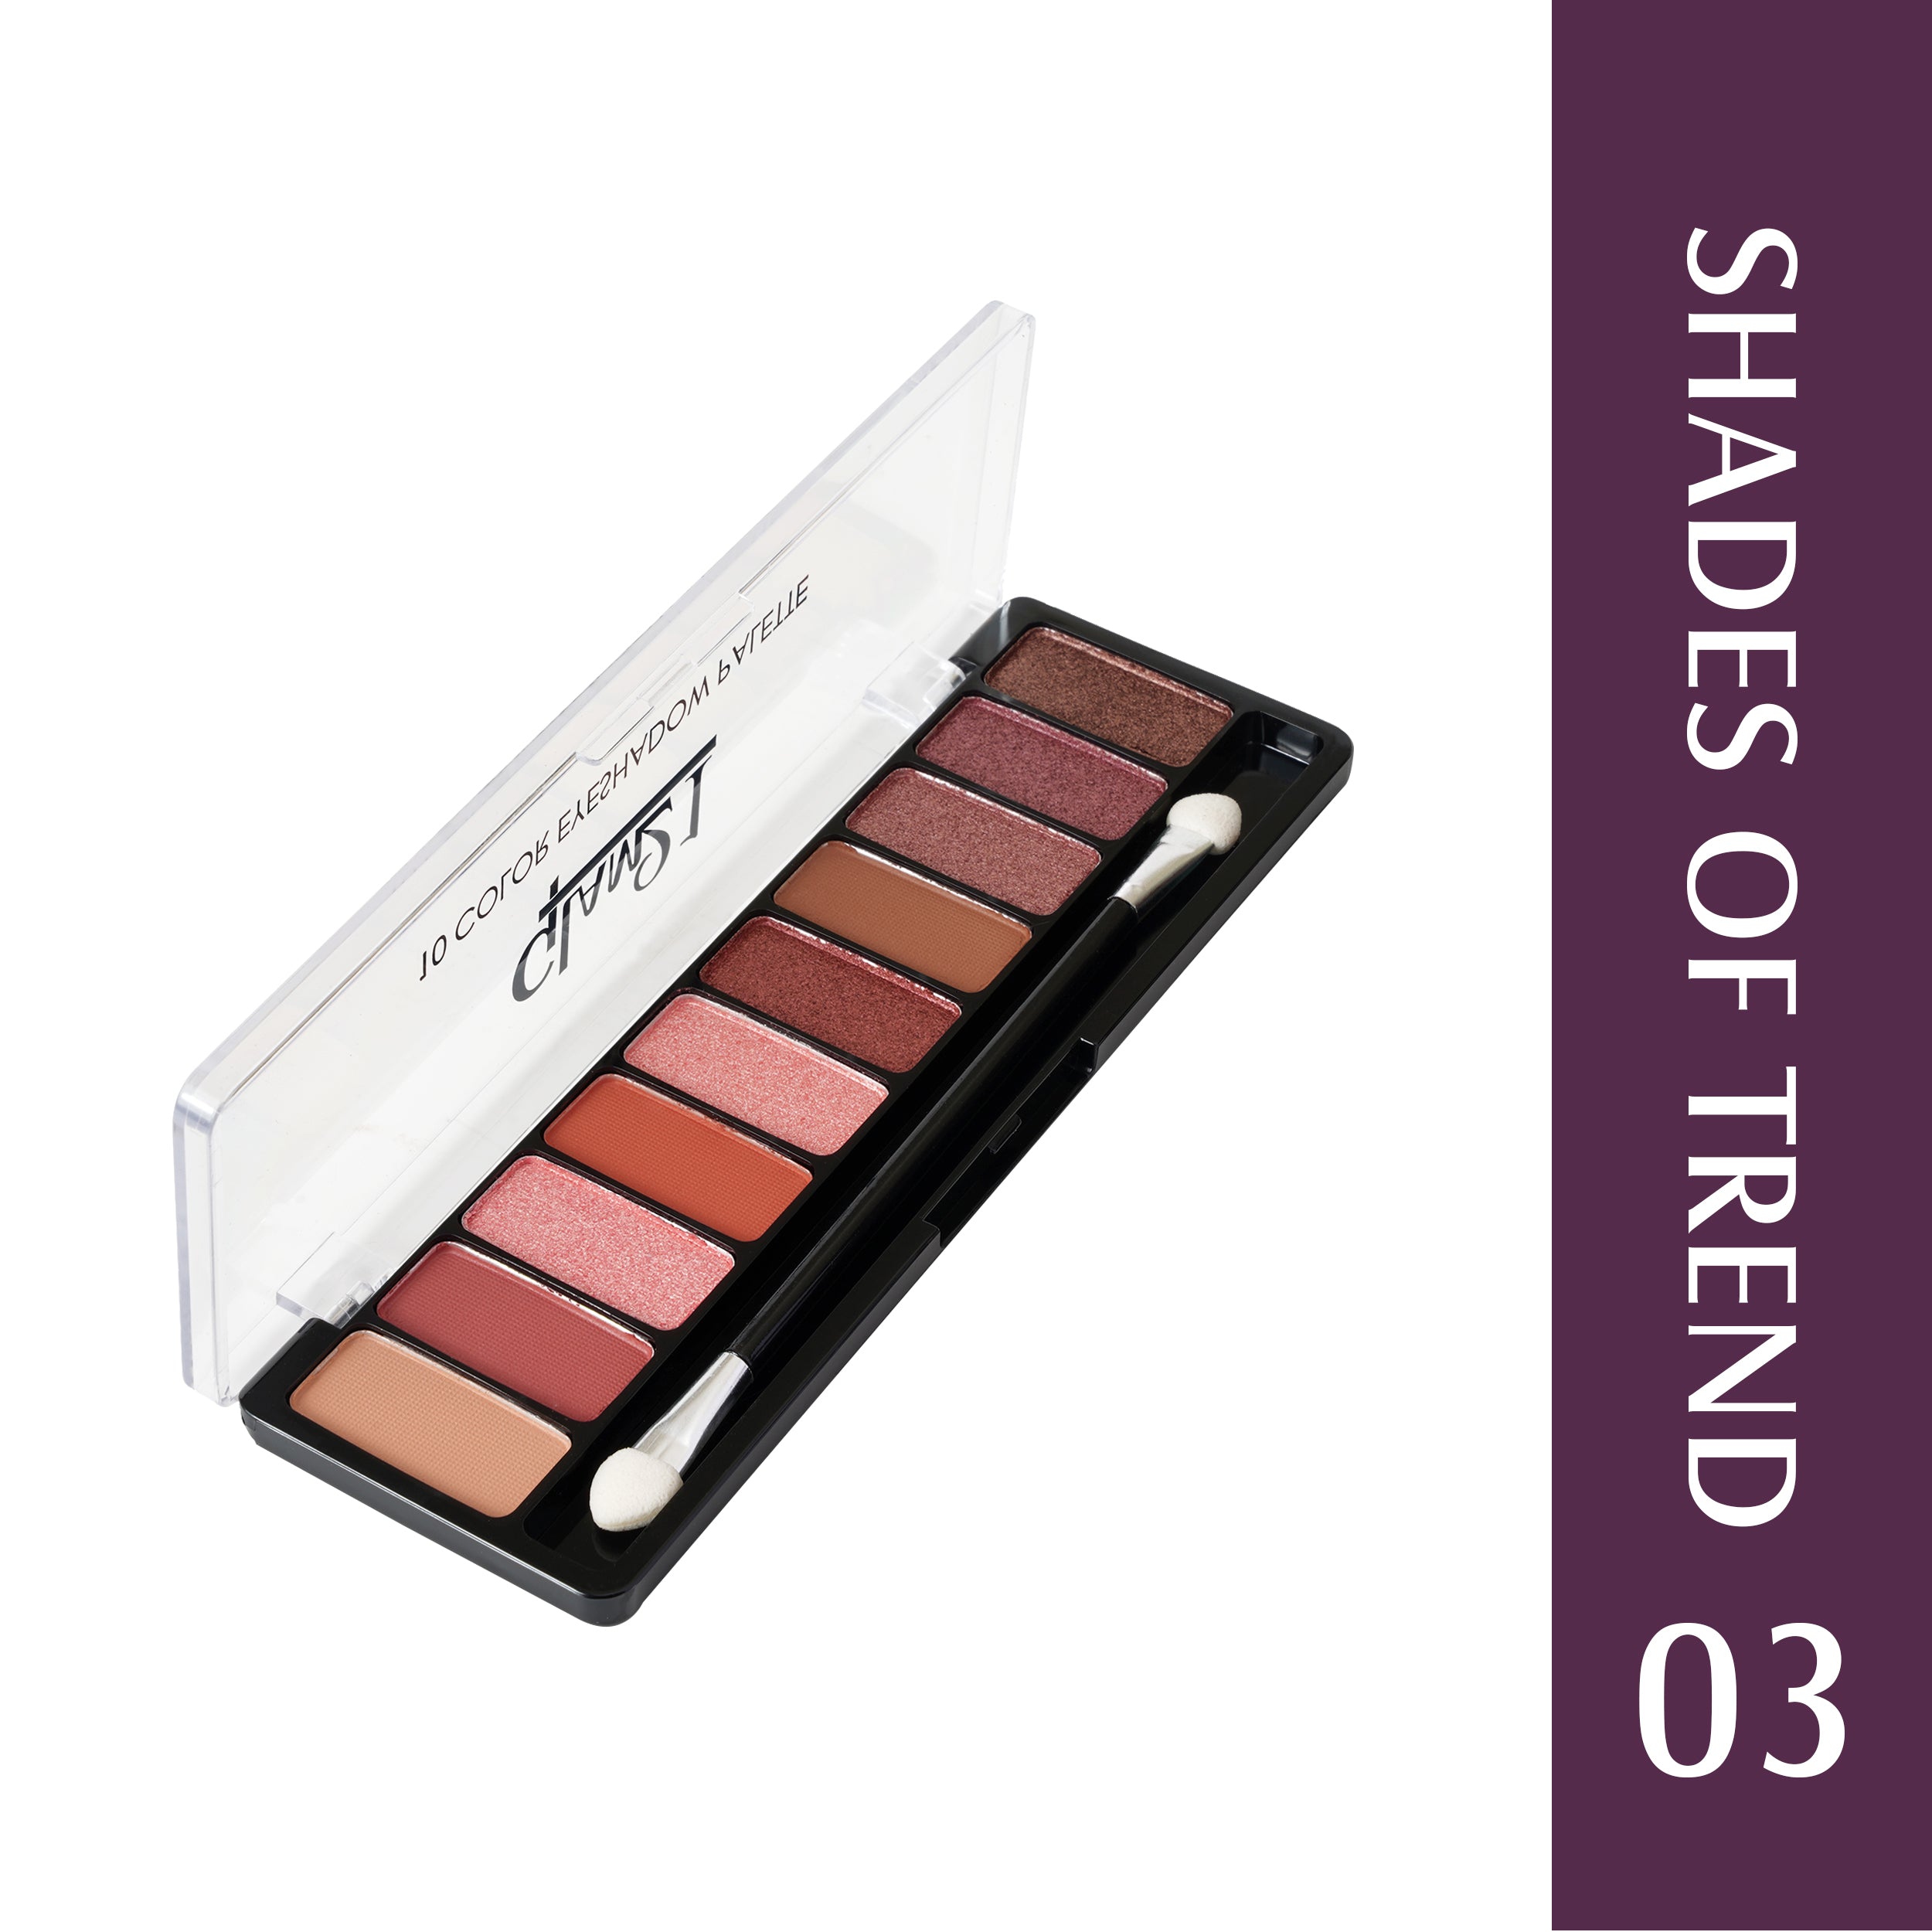 Glam21 10 Color Eyeshadow Palette - Soft Matte & Creamy Shimmer in Just One Swipe 8.8 g (Shade-03)